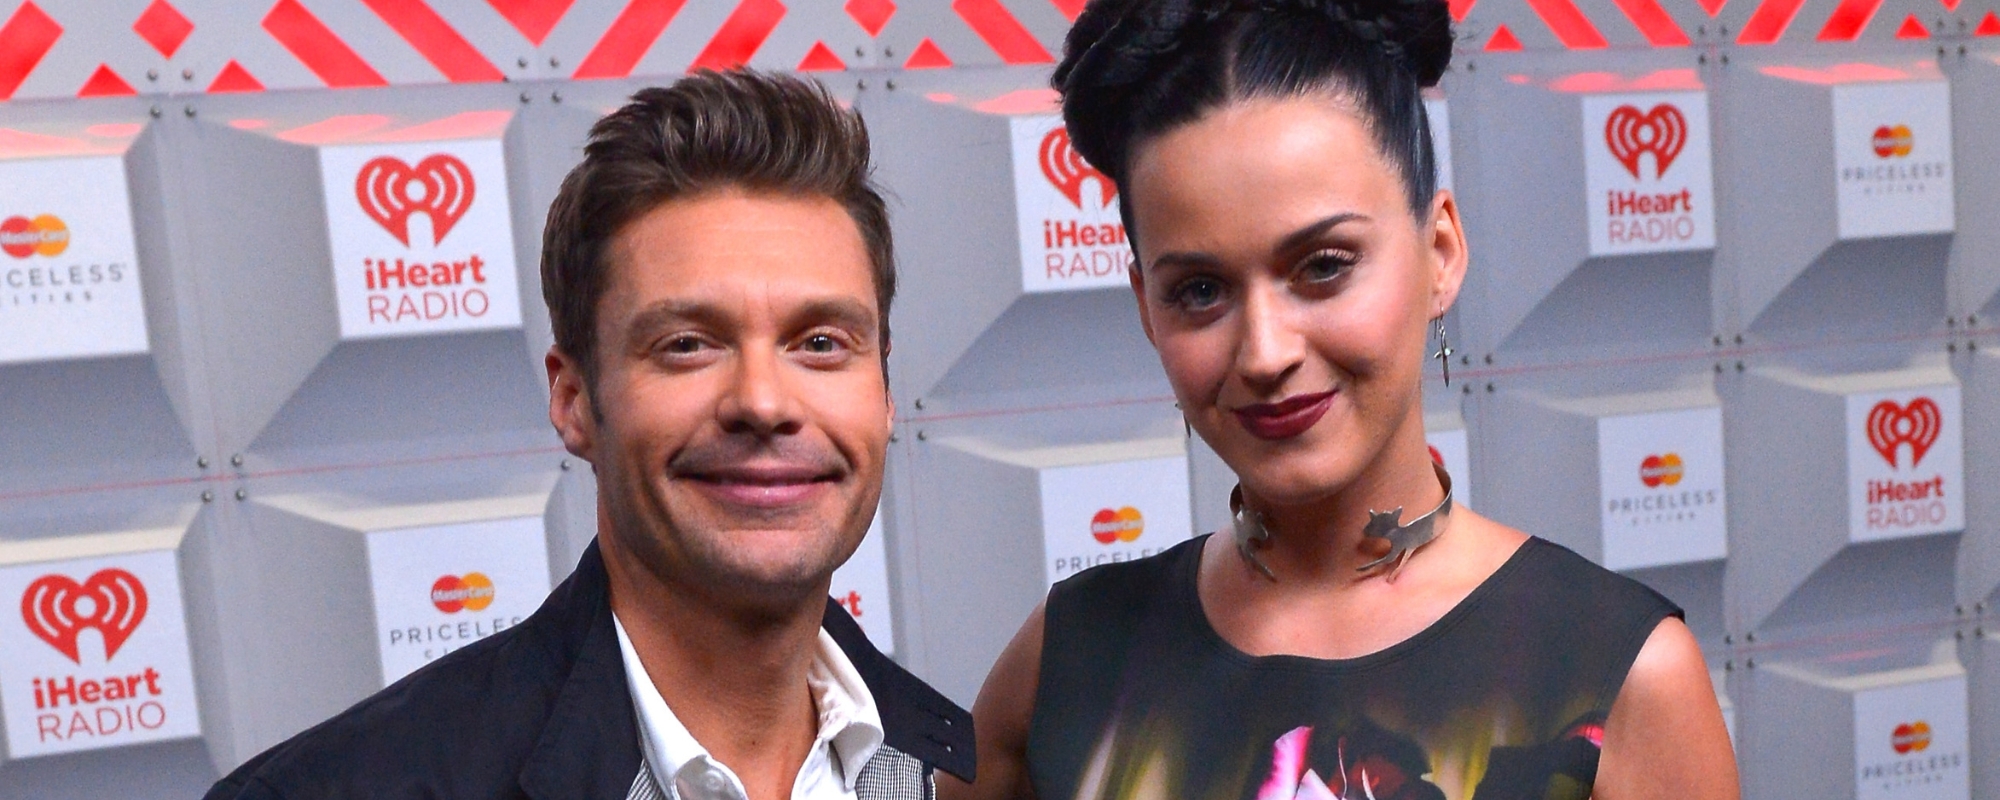 Ryan Seacrest Shares Thoughts on Katy Perry’s ‘American Idol’ Exit, Teases What’s in Store for Her Final Episode